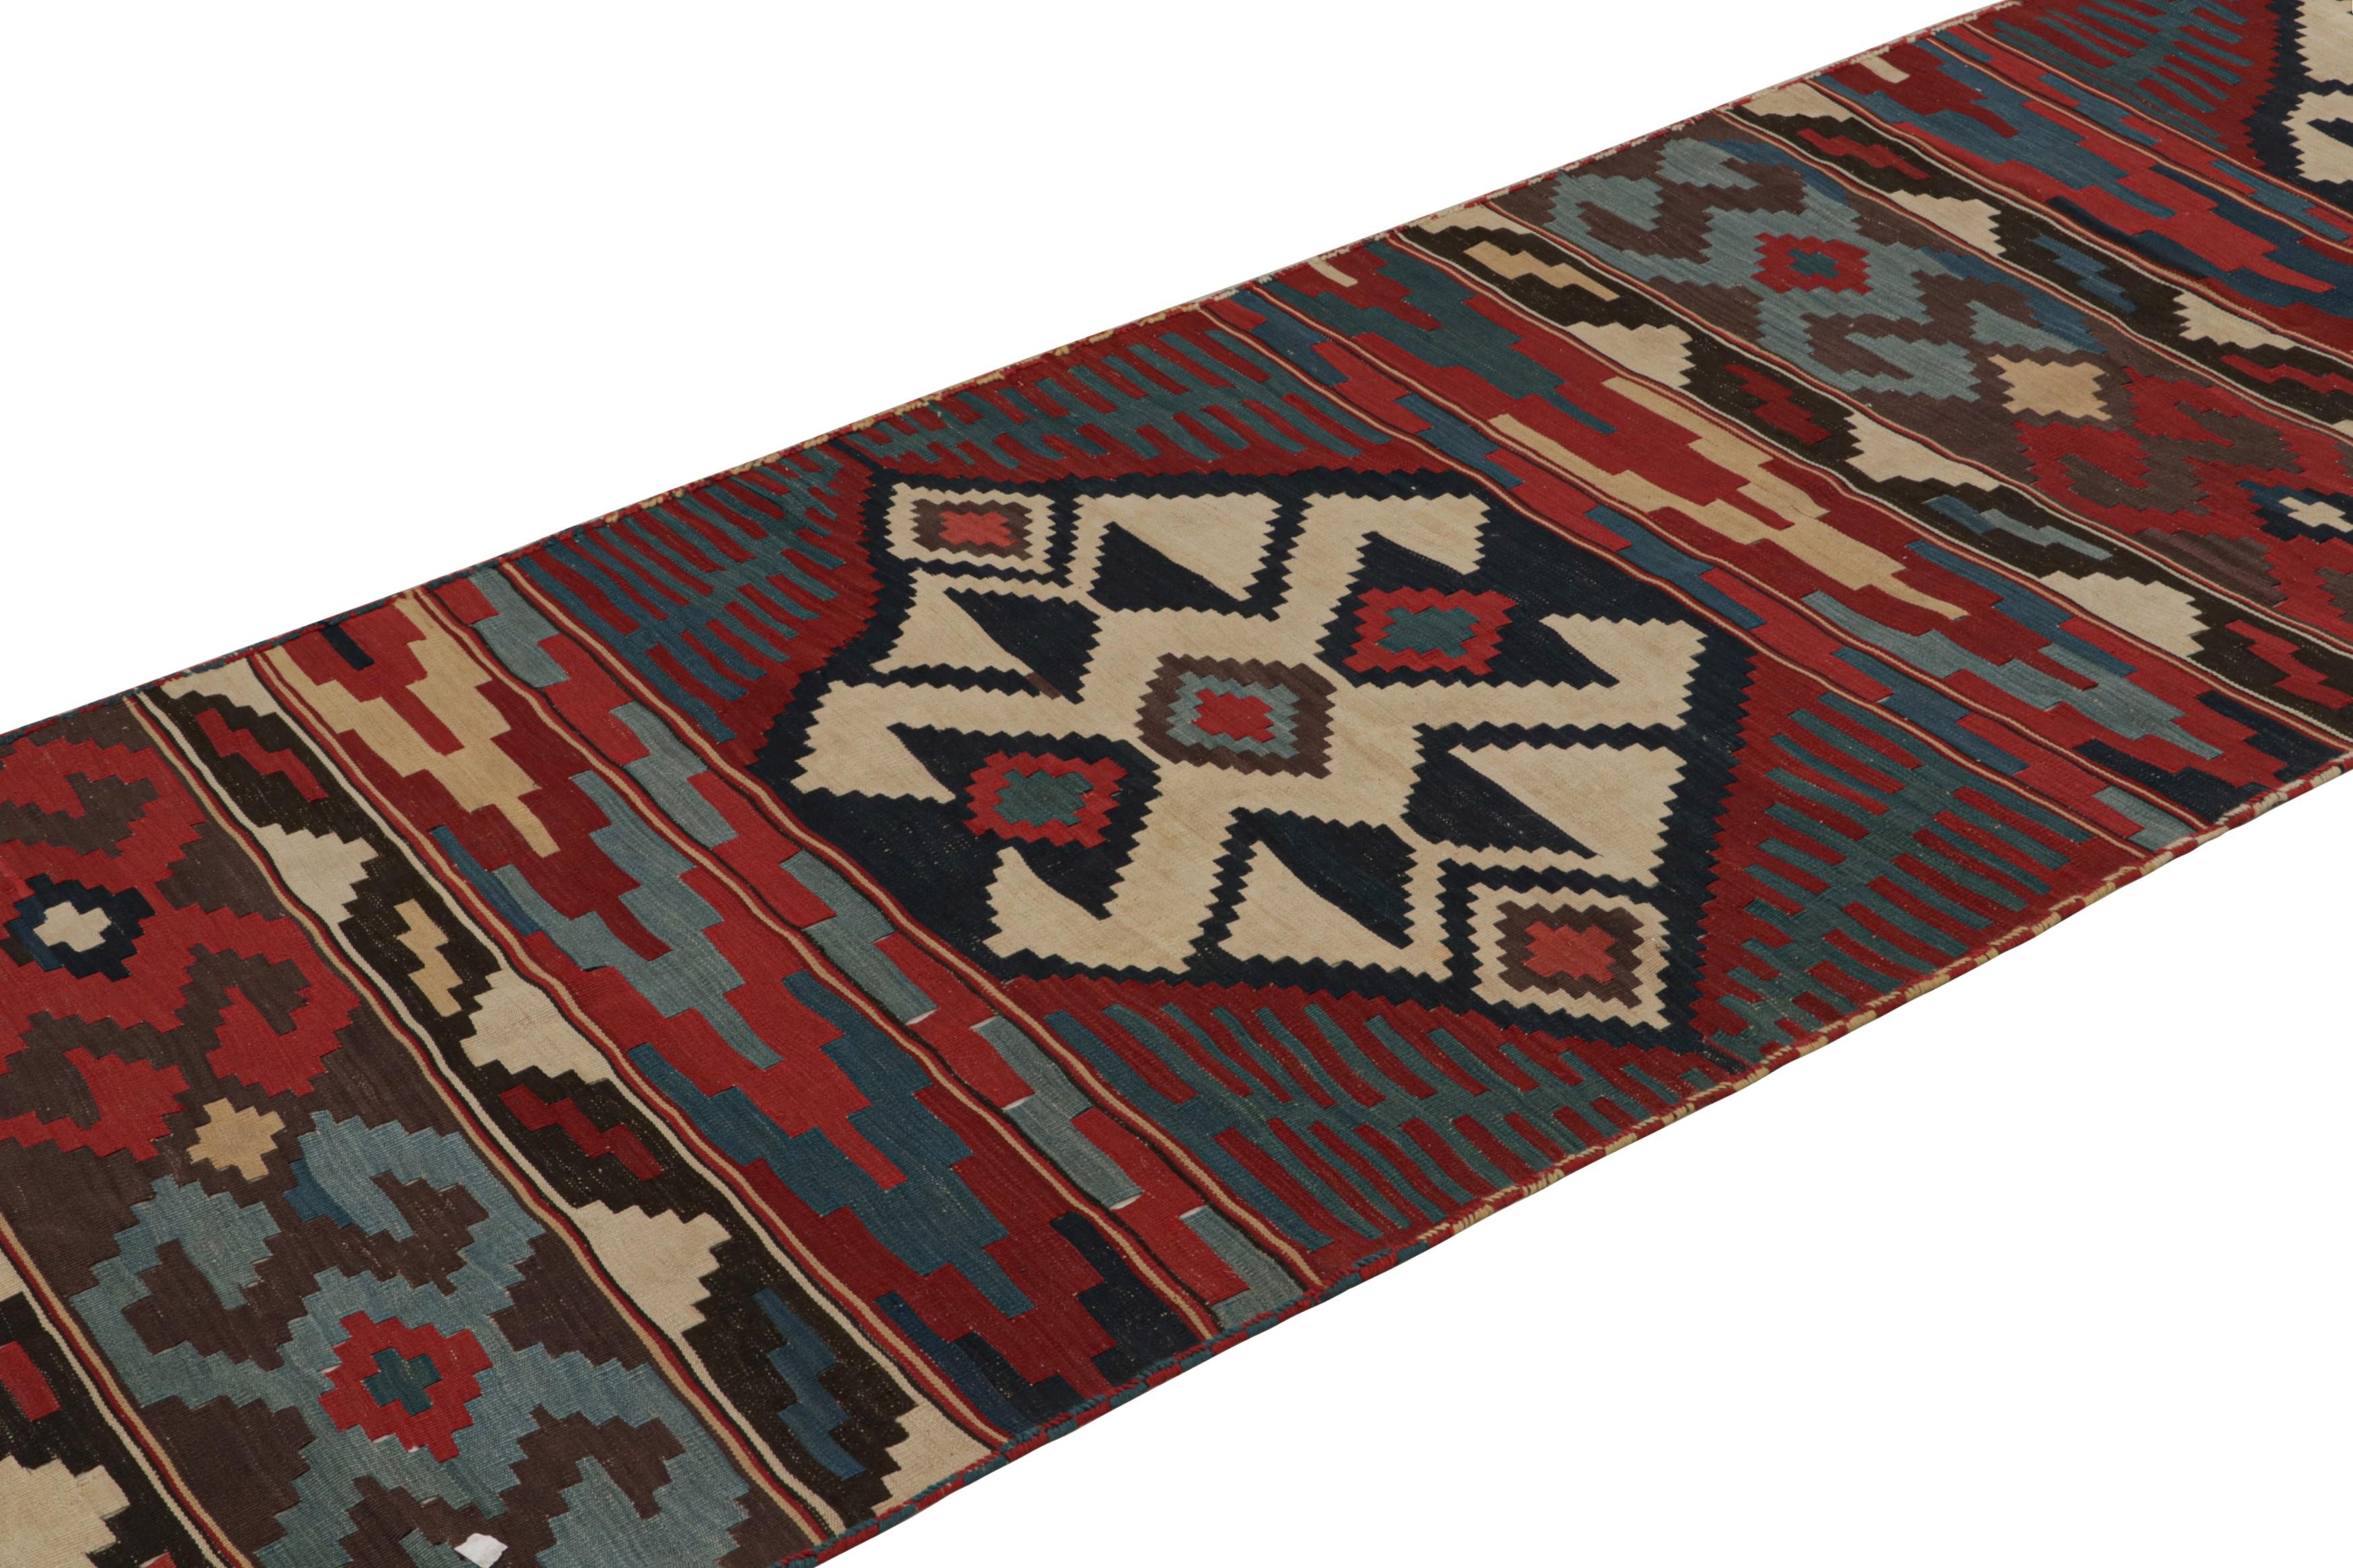 Hand-Knotted Twin Vintage Persian Kilim Runner Rugs with Geometric Patterns, from Rug & Kilim For Sale